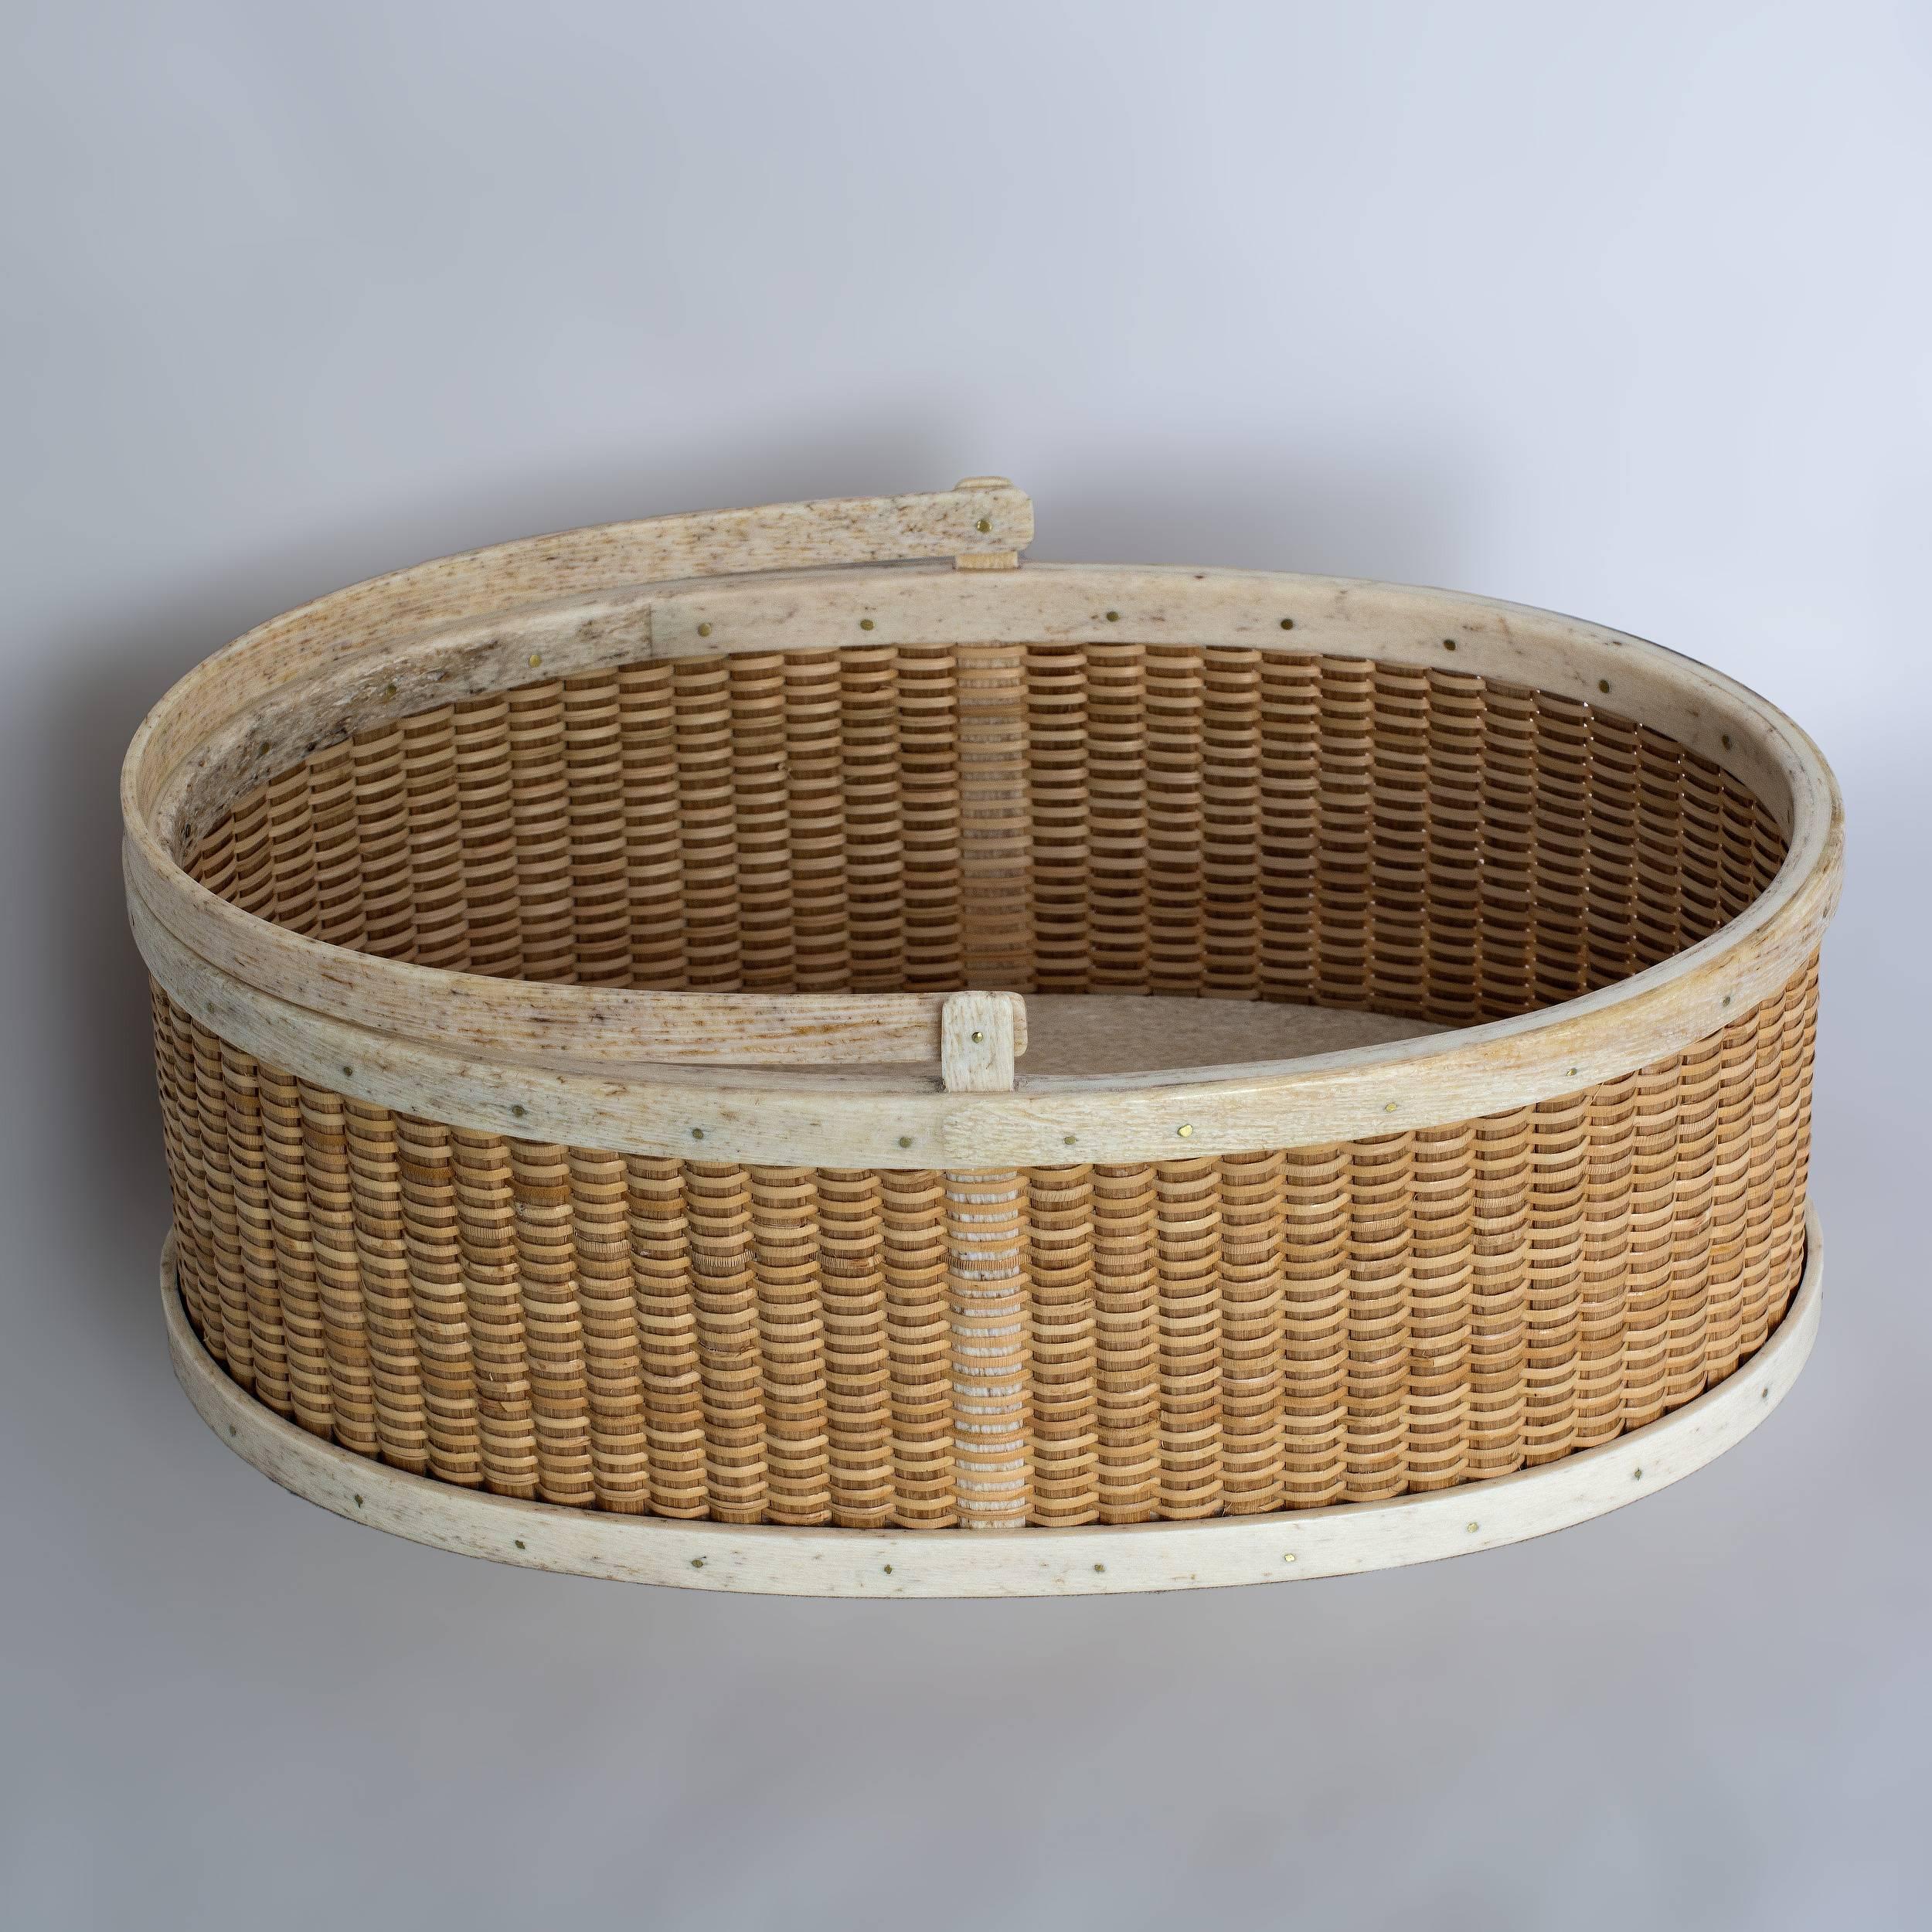 Unusual shallow oval form Nantucket lightship basket with antique bone handle, rims and base with oak staves.
8 ½” x 5 ½” x 3”, 7 ½” to handle crest